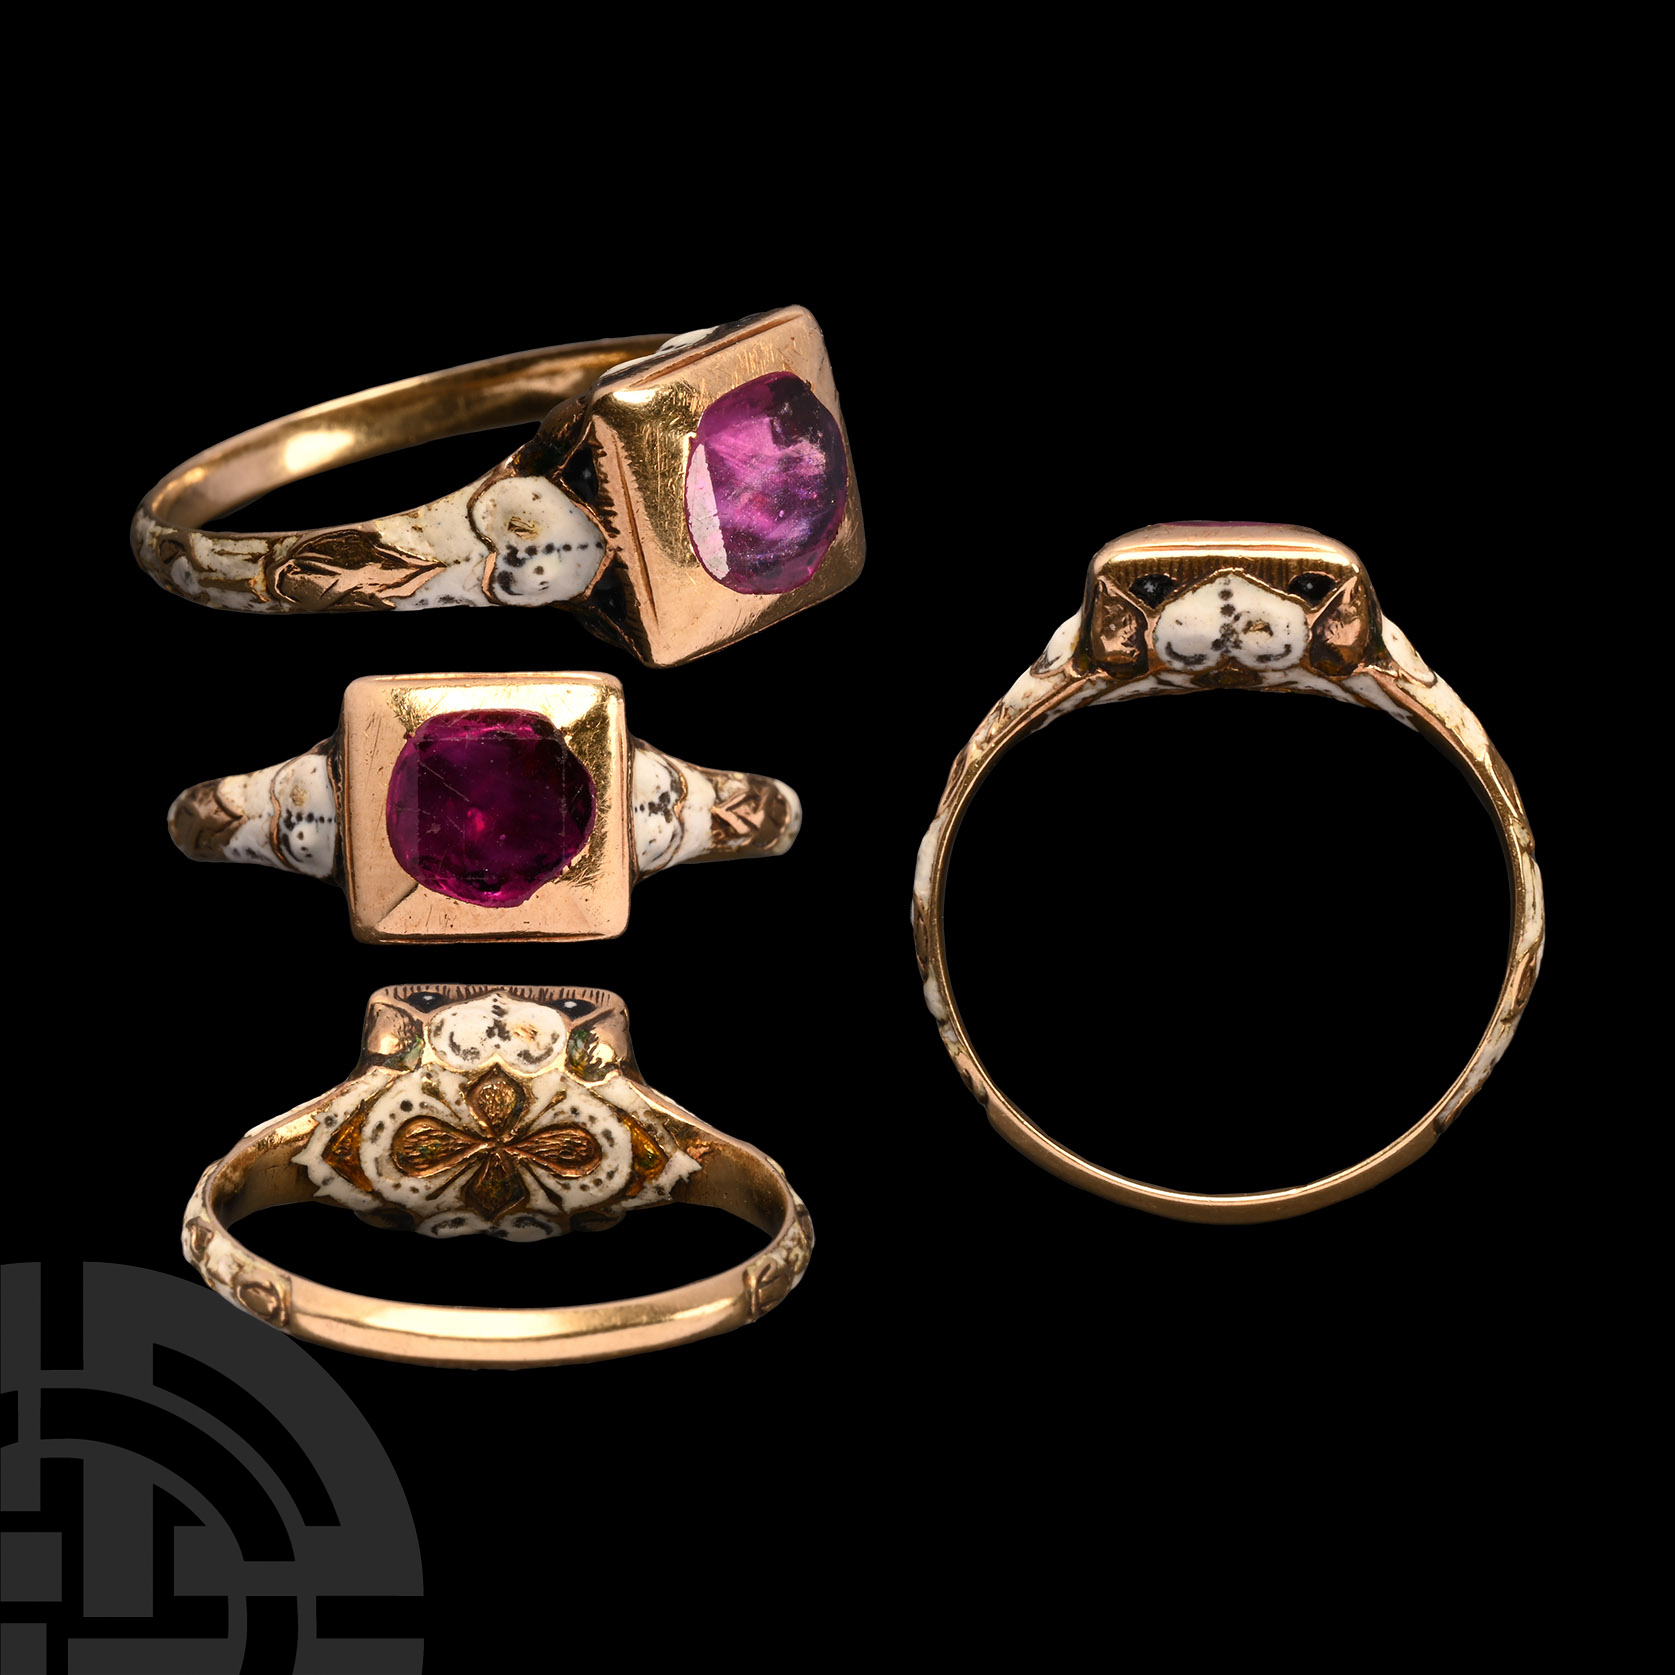 Baroque Gold, Ruby and Enamel Ring